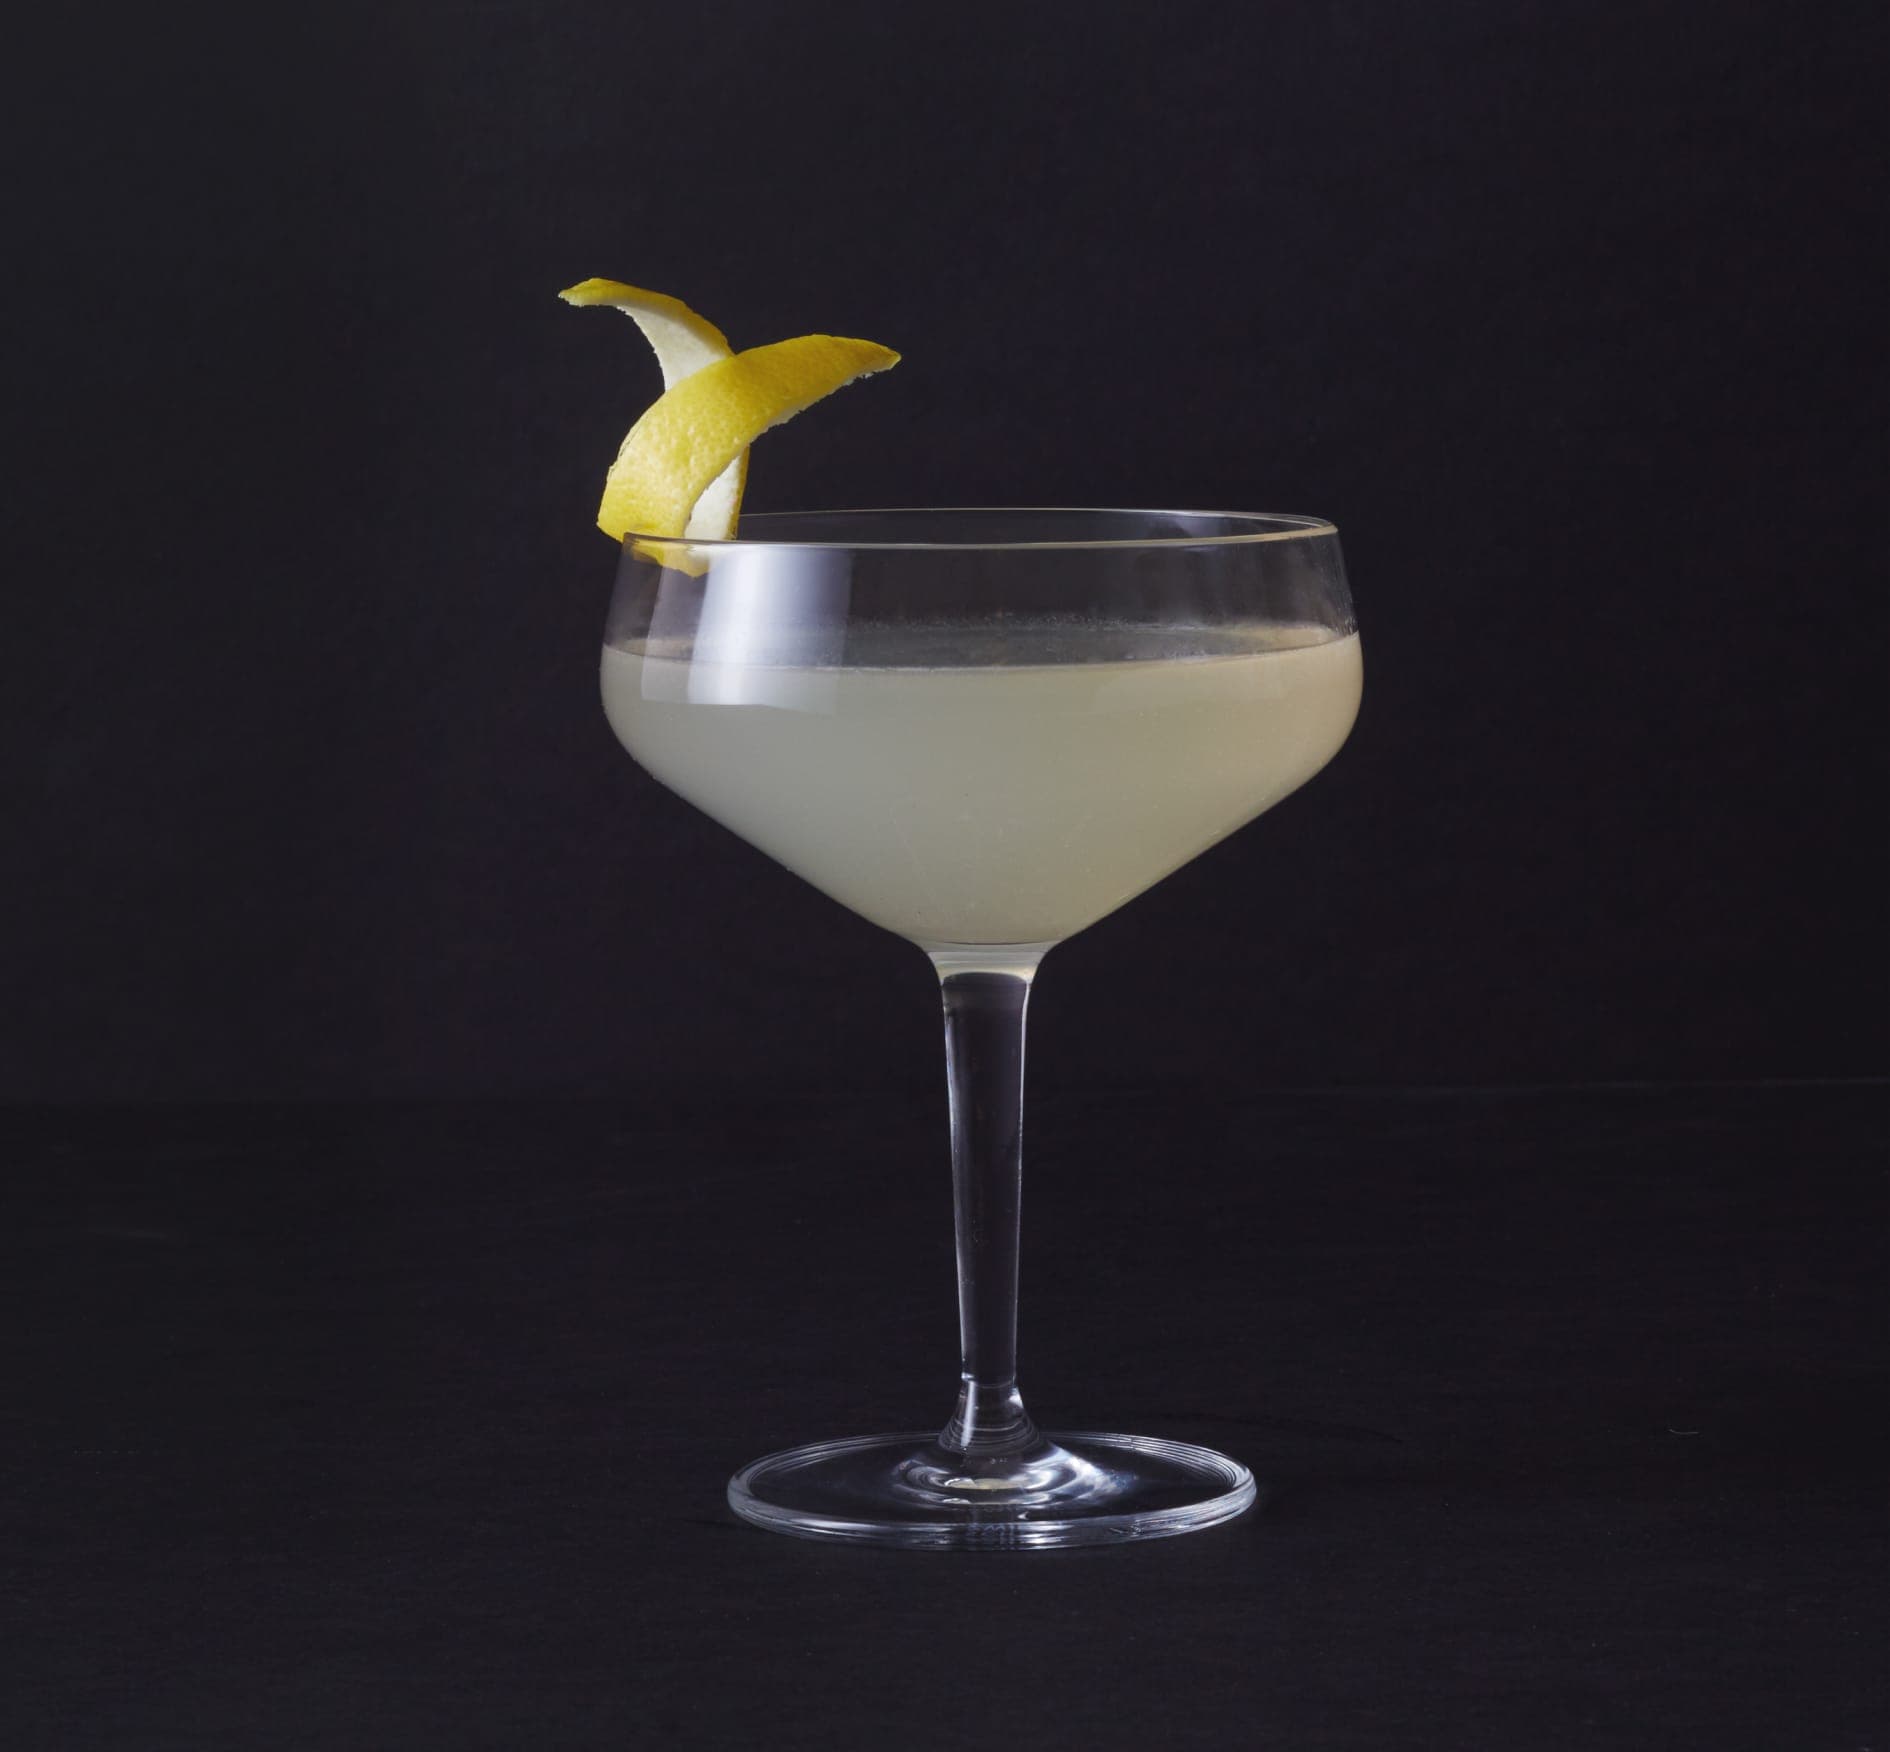 A cocktail glass sits in the centre on a black background. The glass is filled with a liquid the colour of lemon juice and is slightly cloudy. The rim of the glass is garnished with a twist of lemon peel.